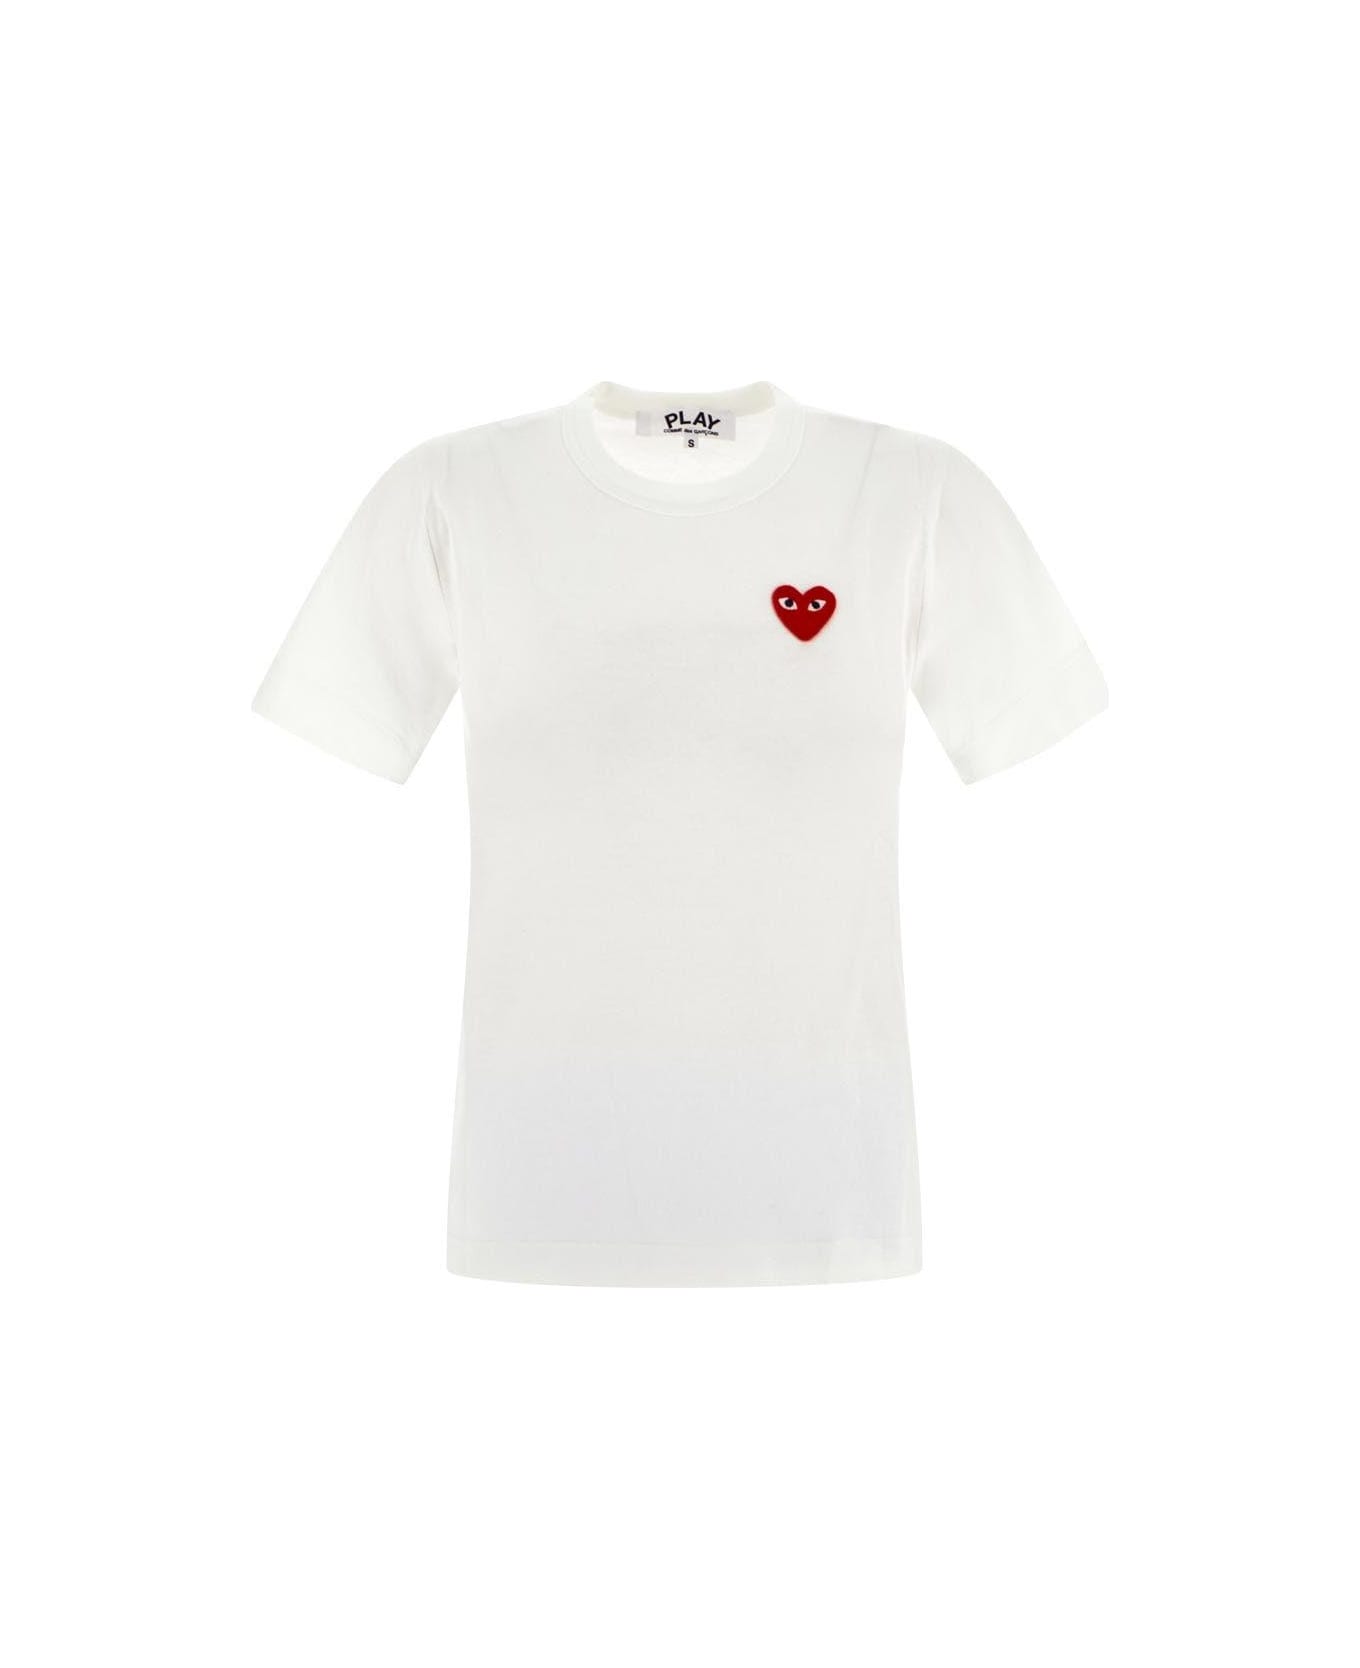 Comme des Garçons Play White Embroidered Heart T-shirt - White